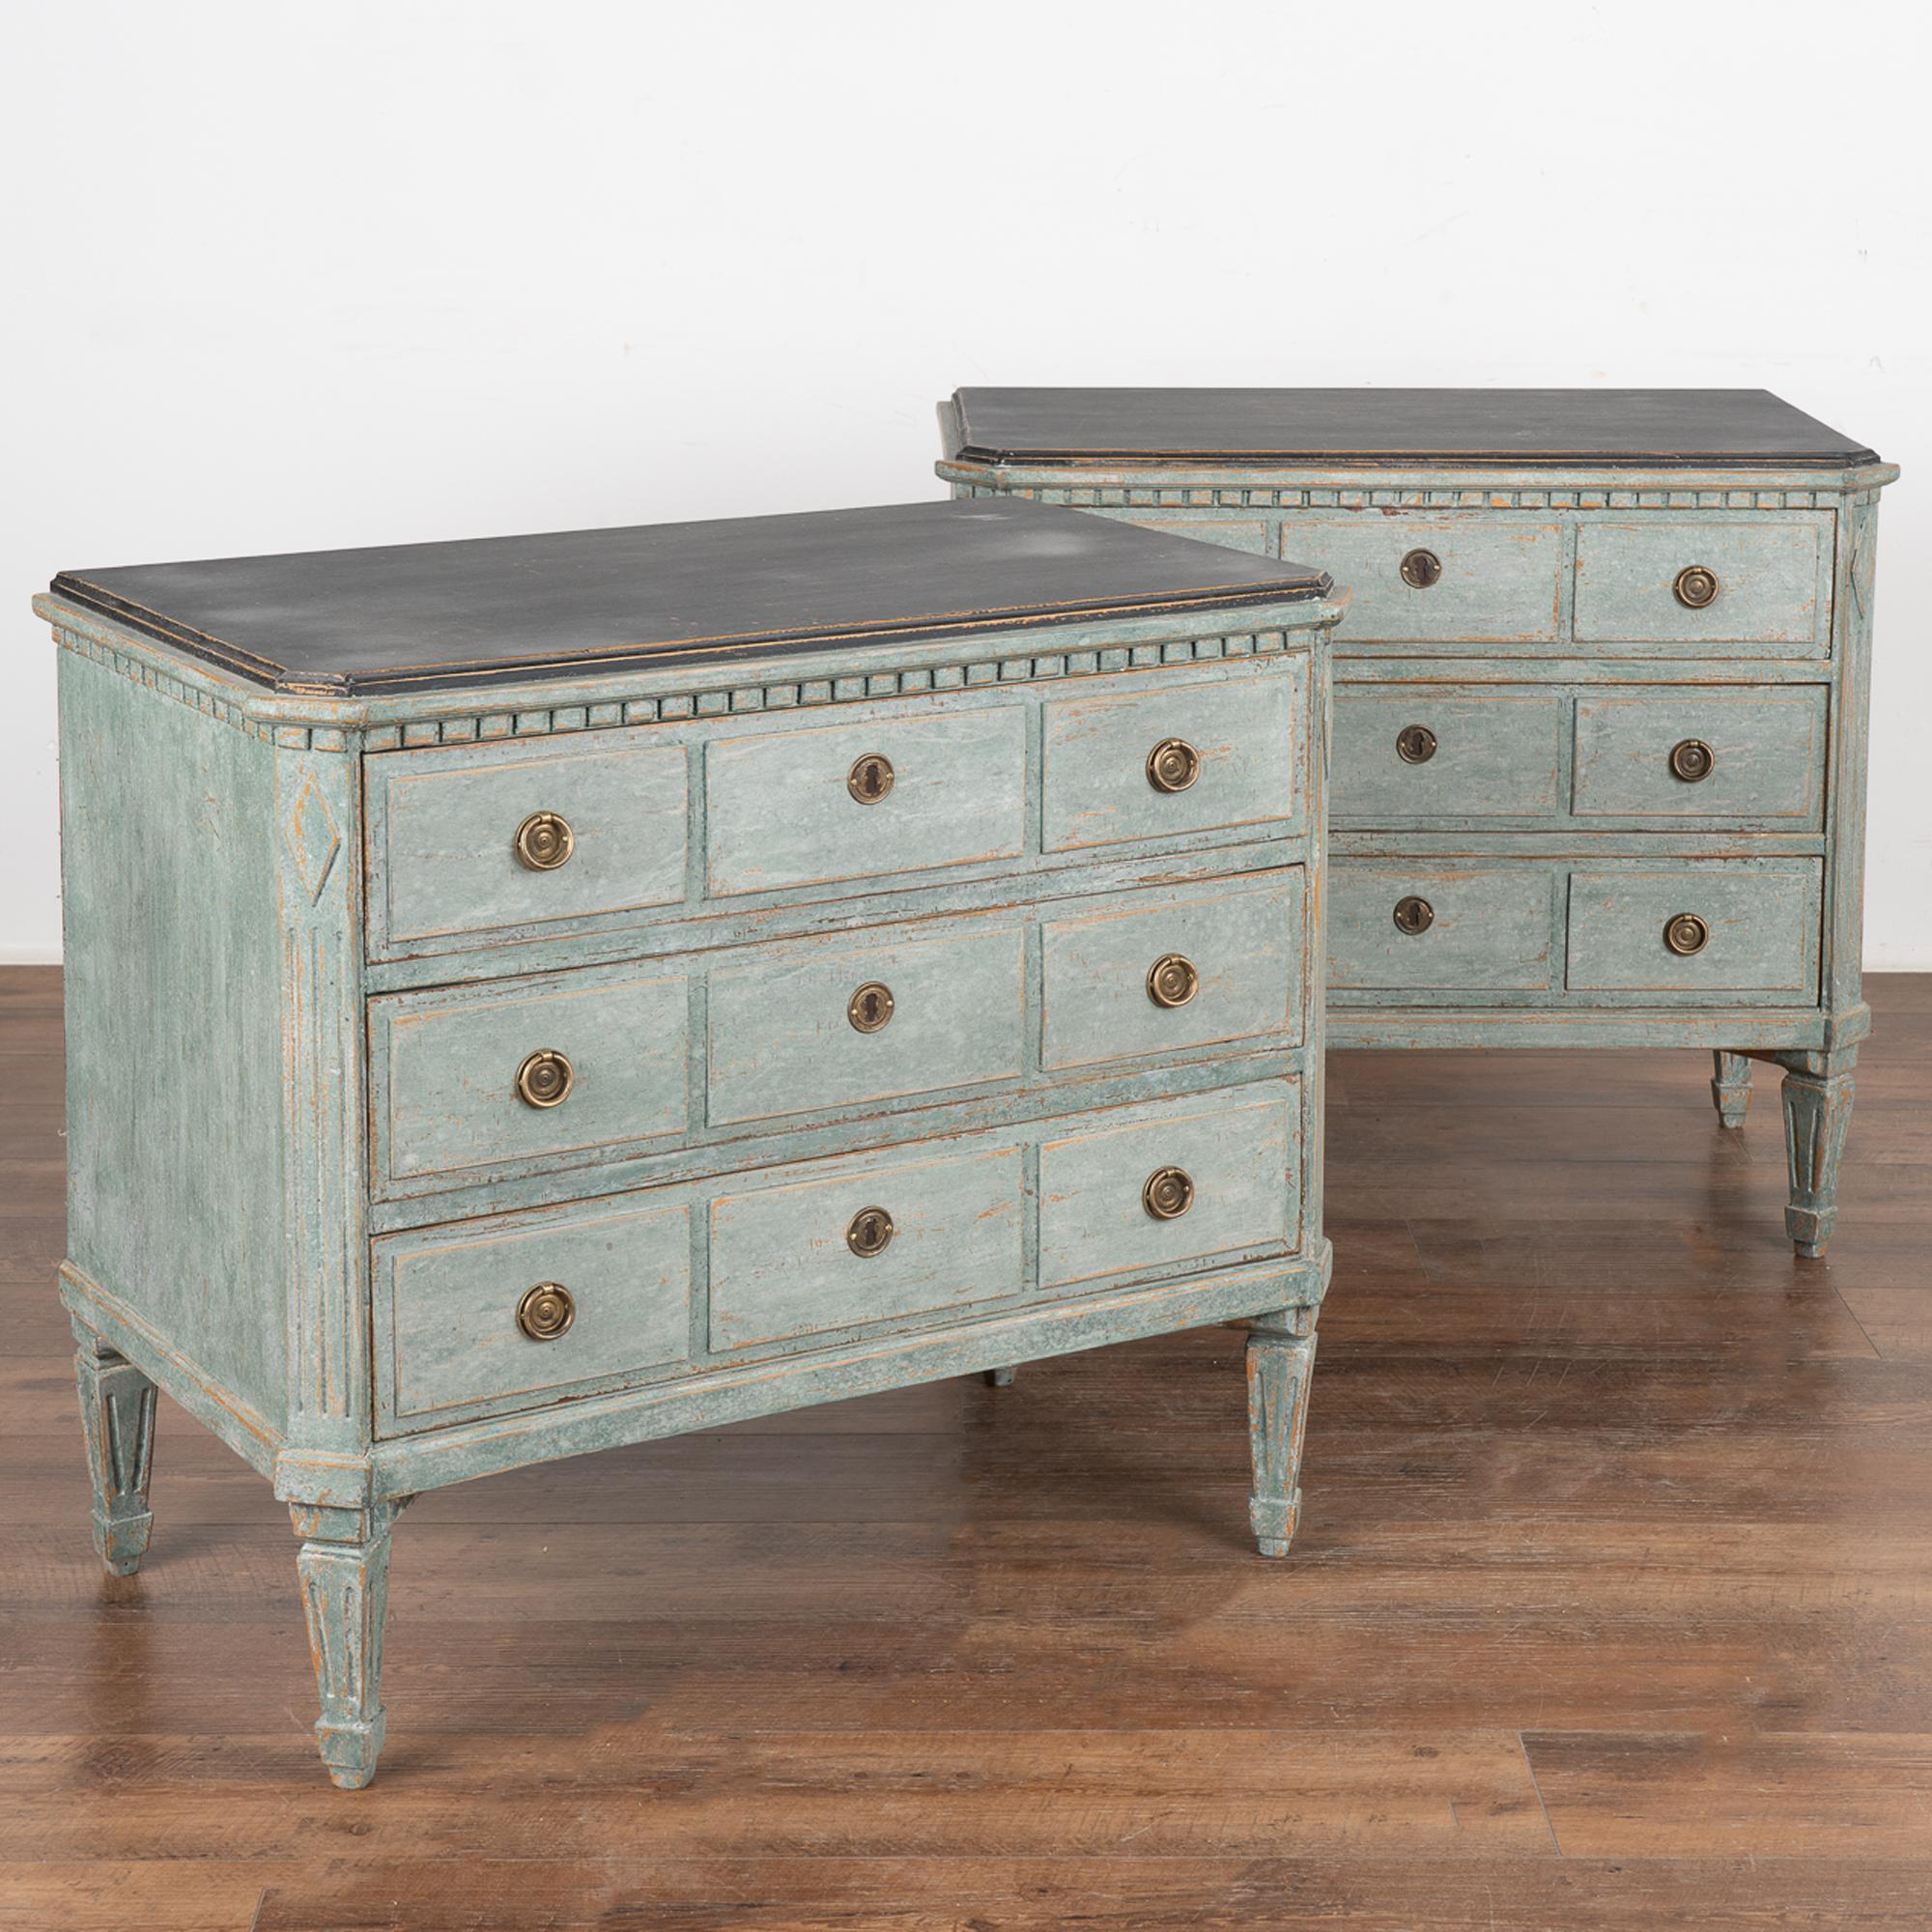 A pair of decorative Gustavian pine chest of drawers with canted fluted side posts with upper carved diamond medallion and dentil molding. All resting on four tapered fluted feet.
The newer, professionally applied layered blue/seafoam (with soft